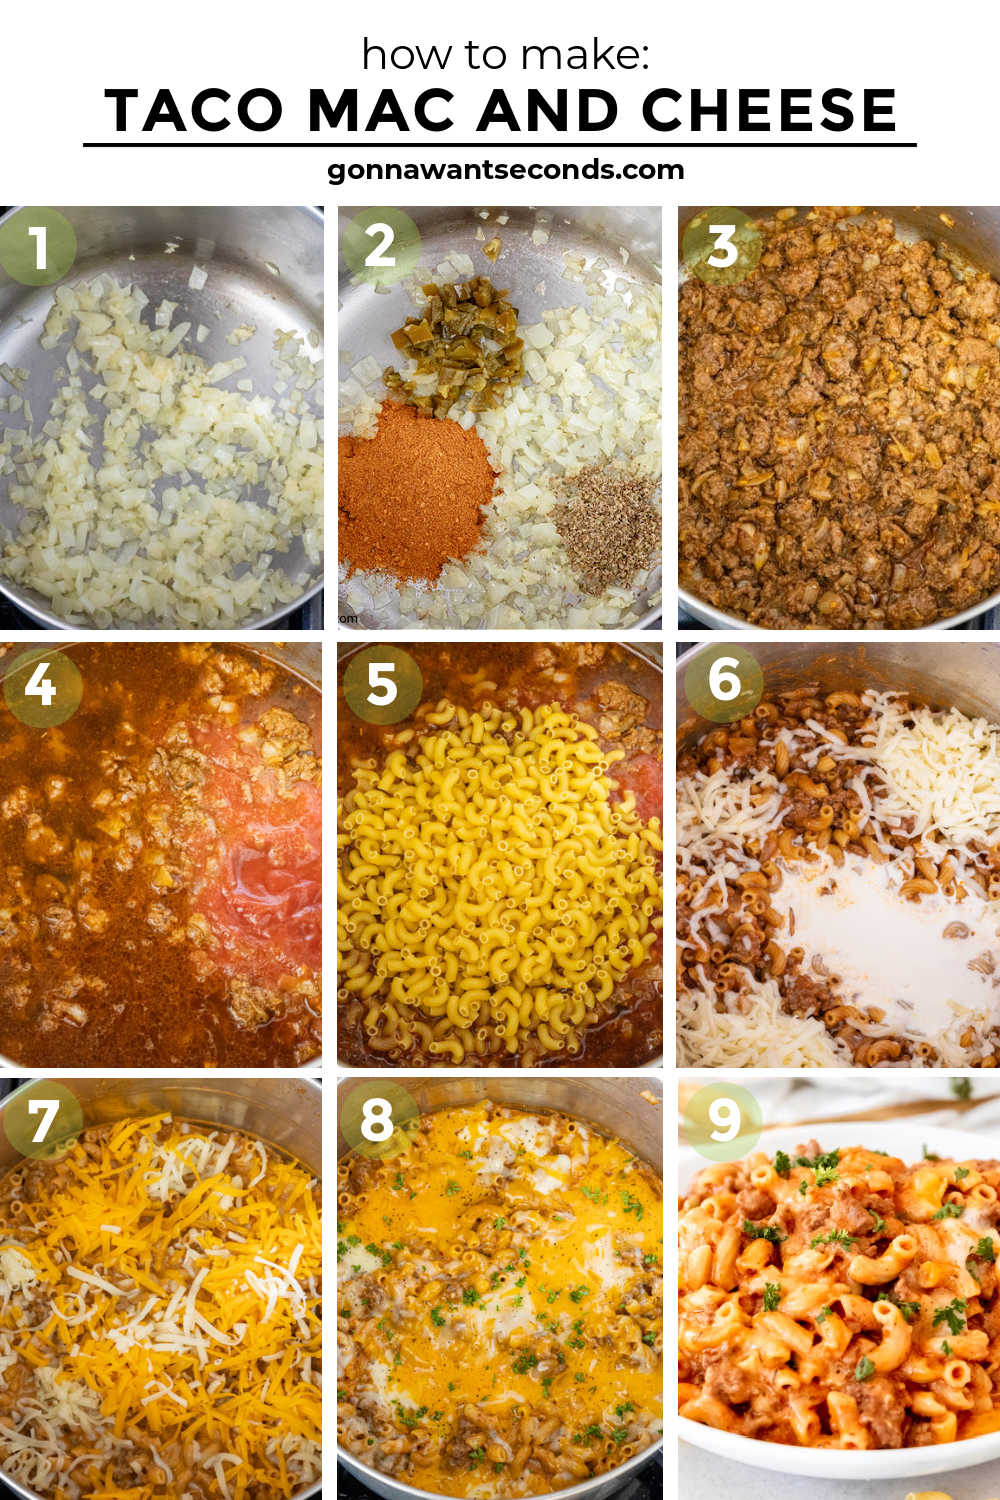 Step by step how to make taco mac and cheese